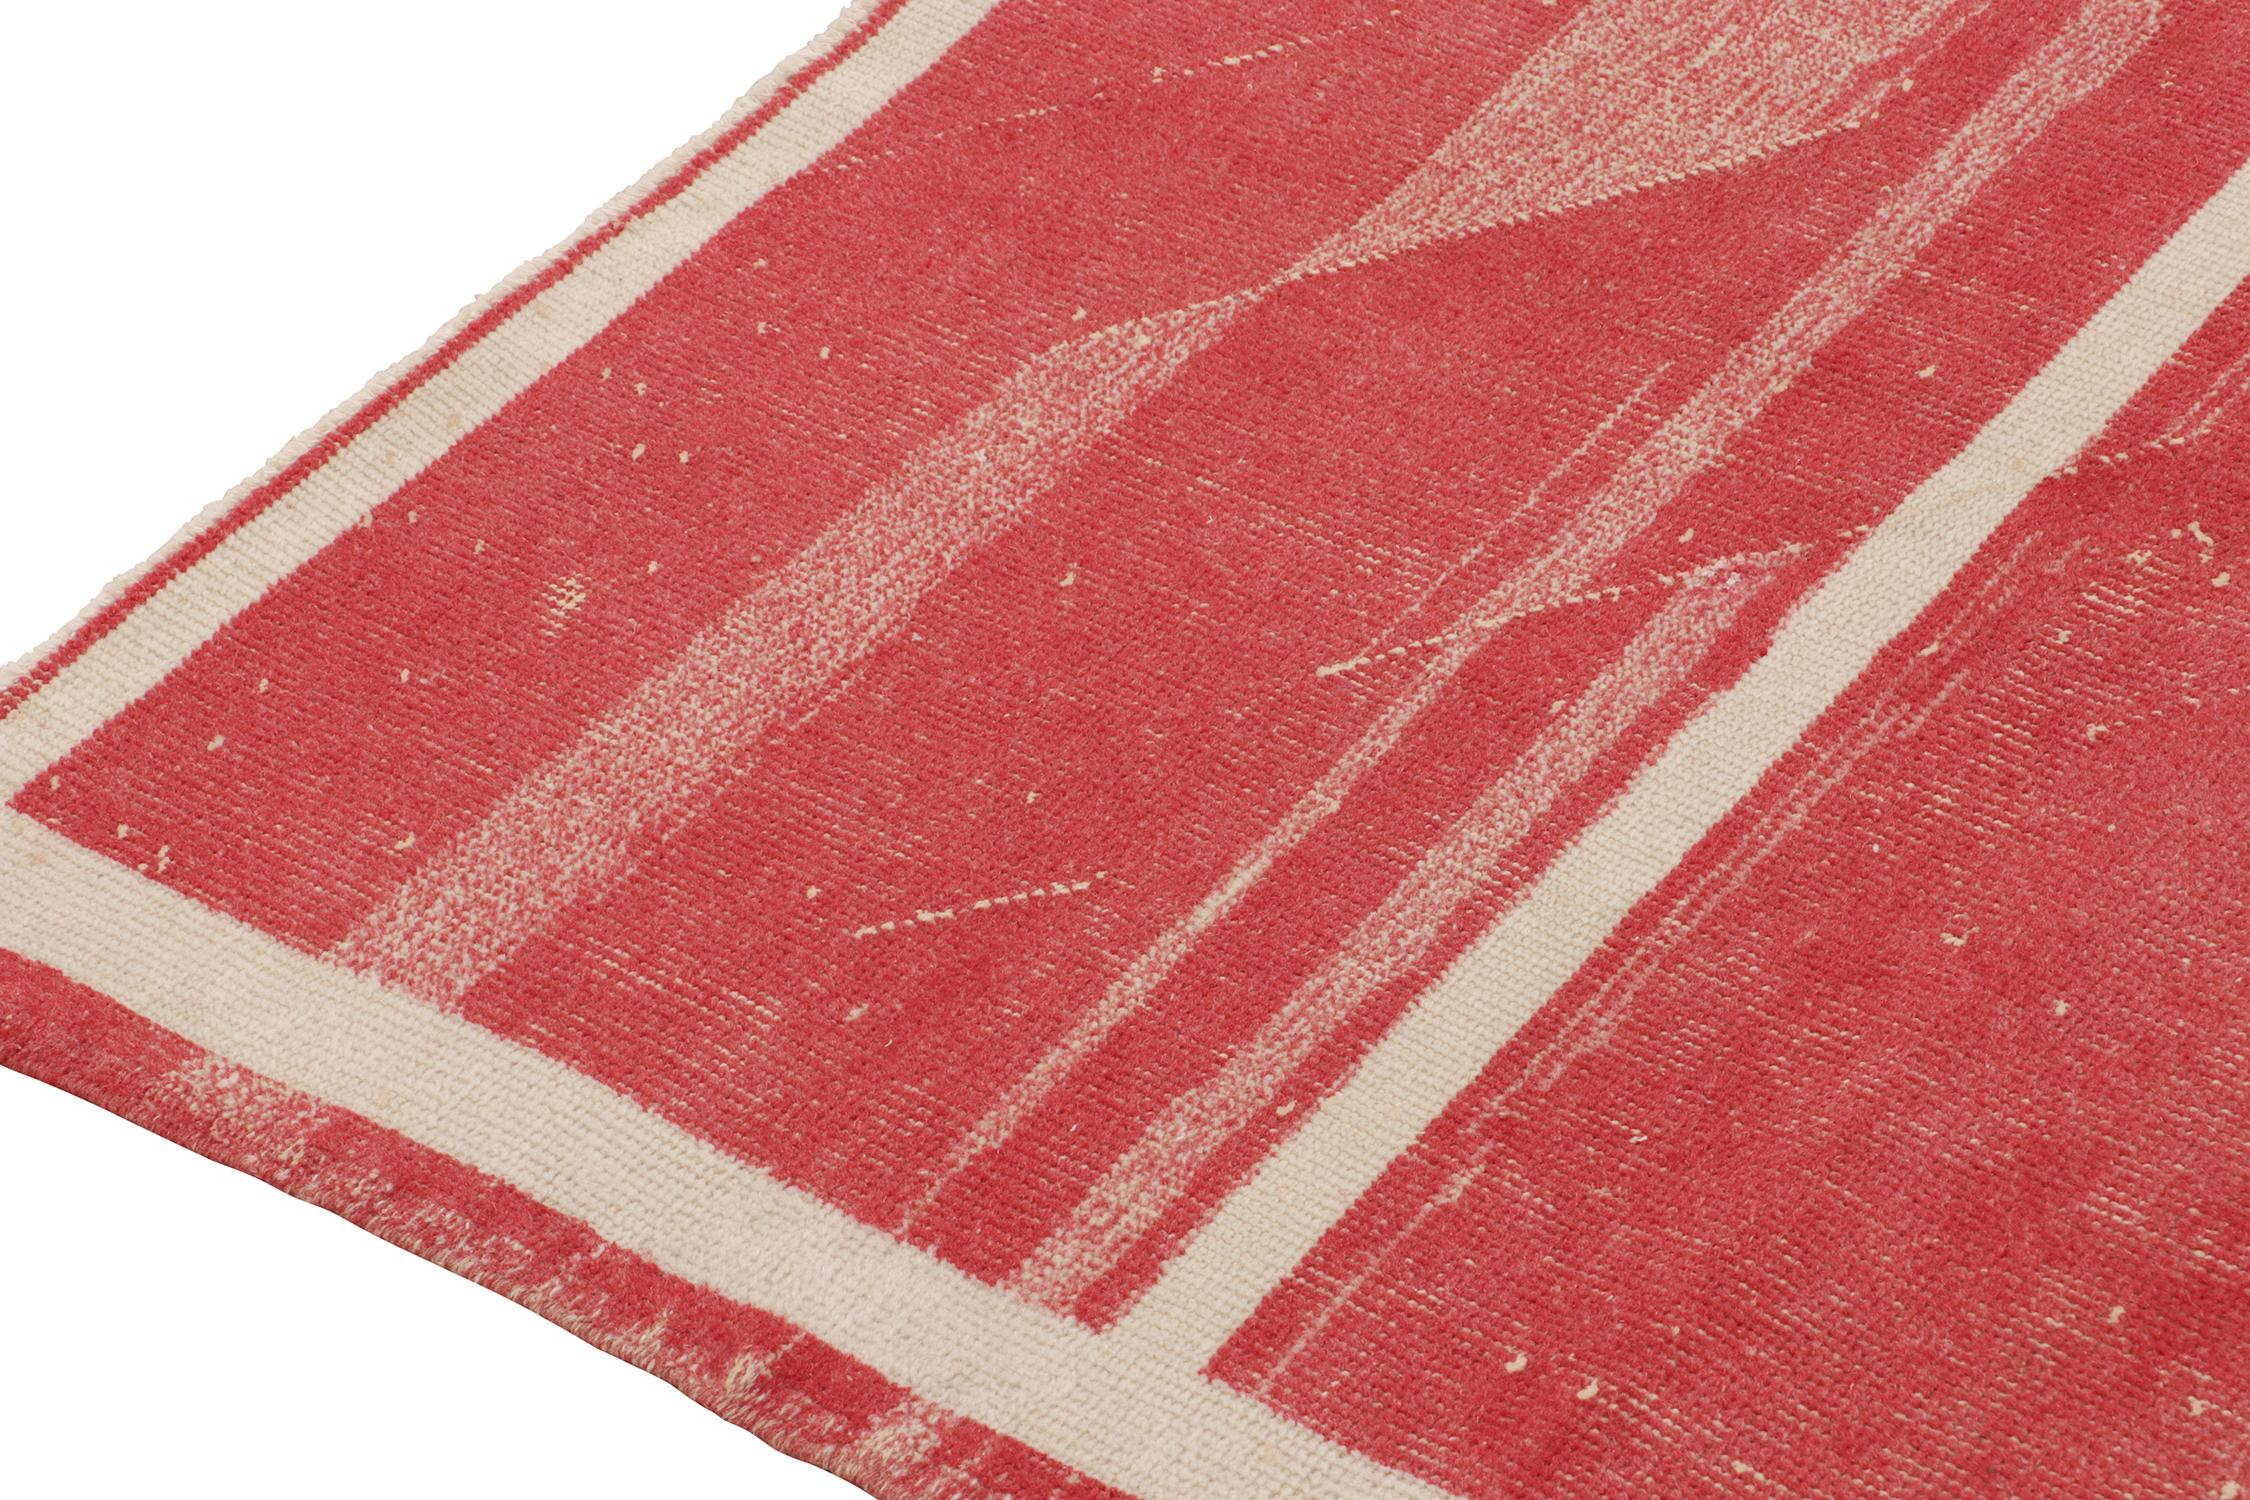 Vintage Rug in Red with Off-White Stripe Patterns by Rug & Kilim In Good Condition For Sale In Long Island City, NY